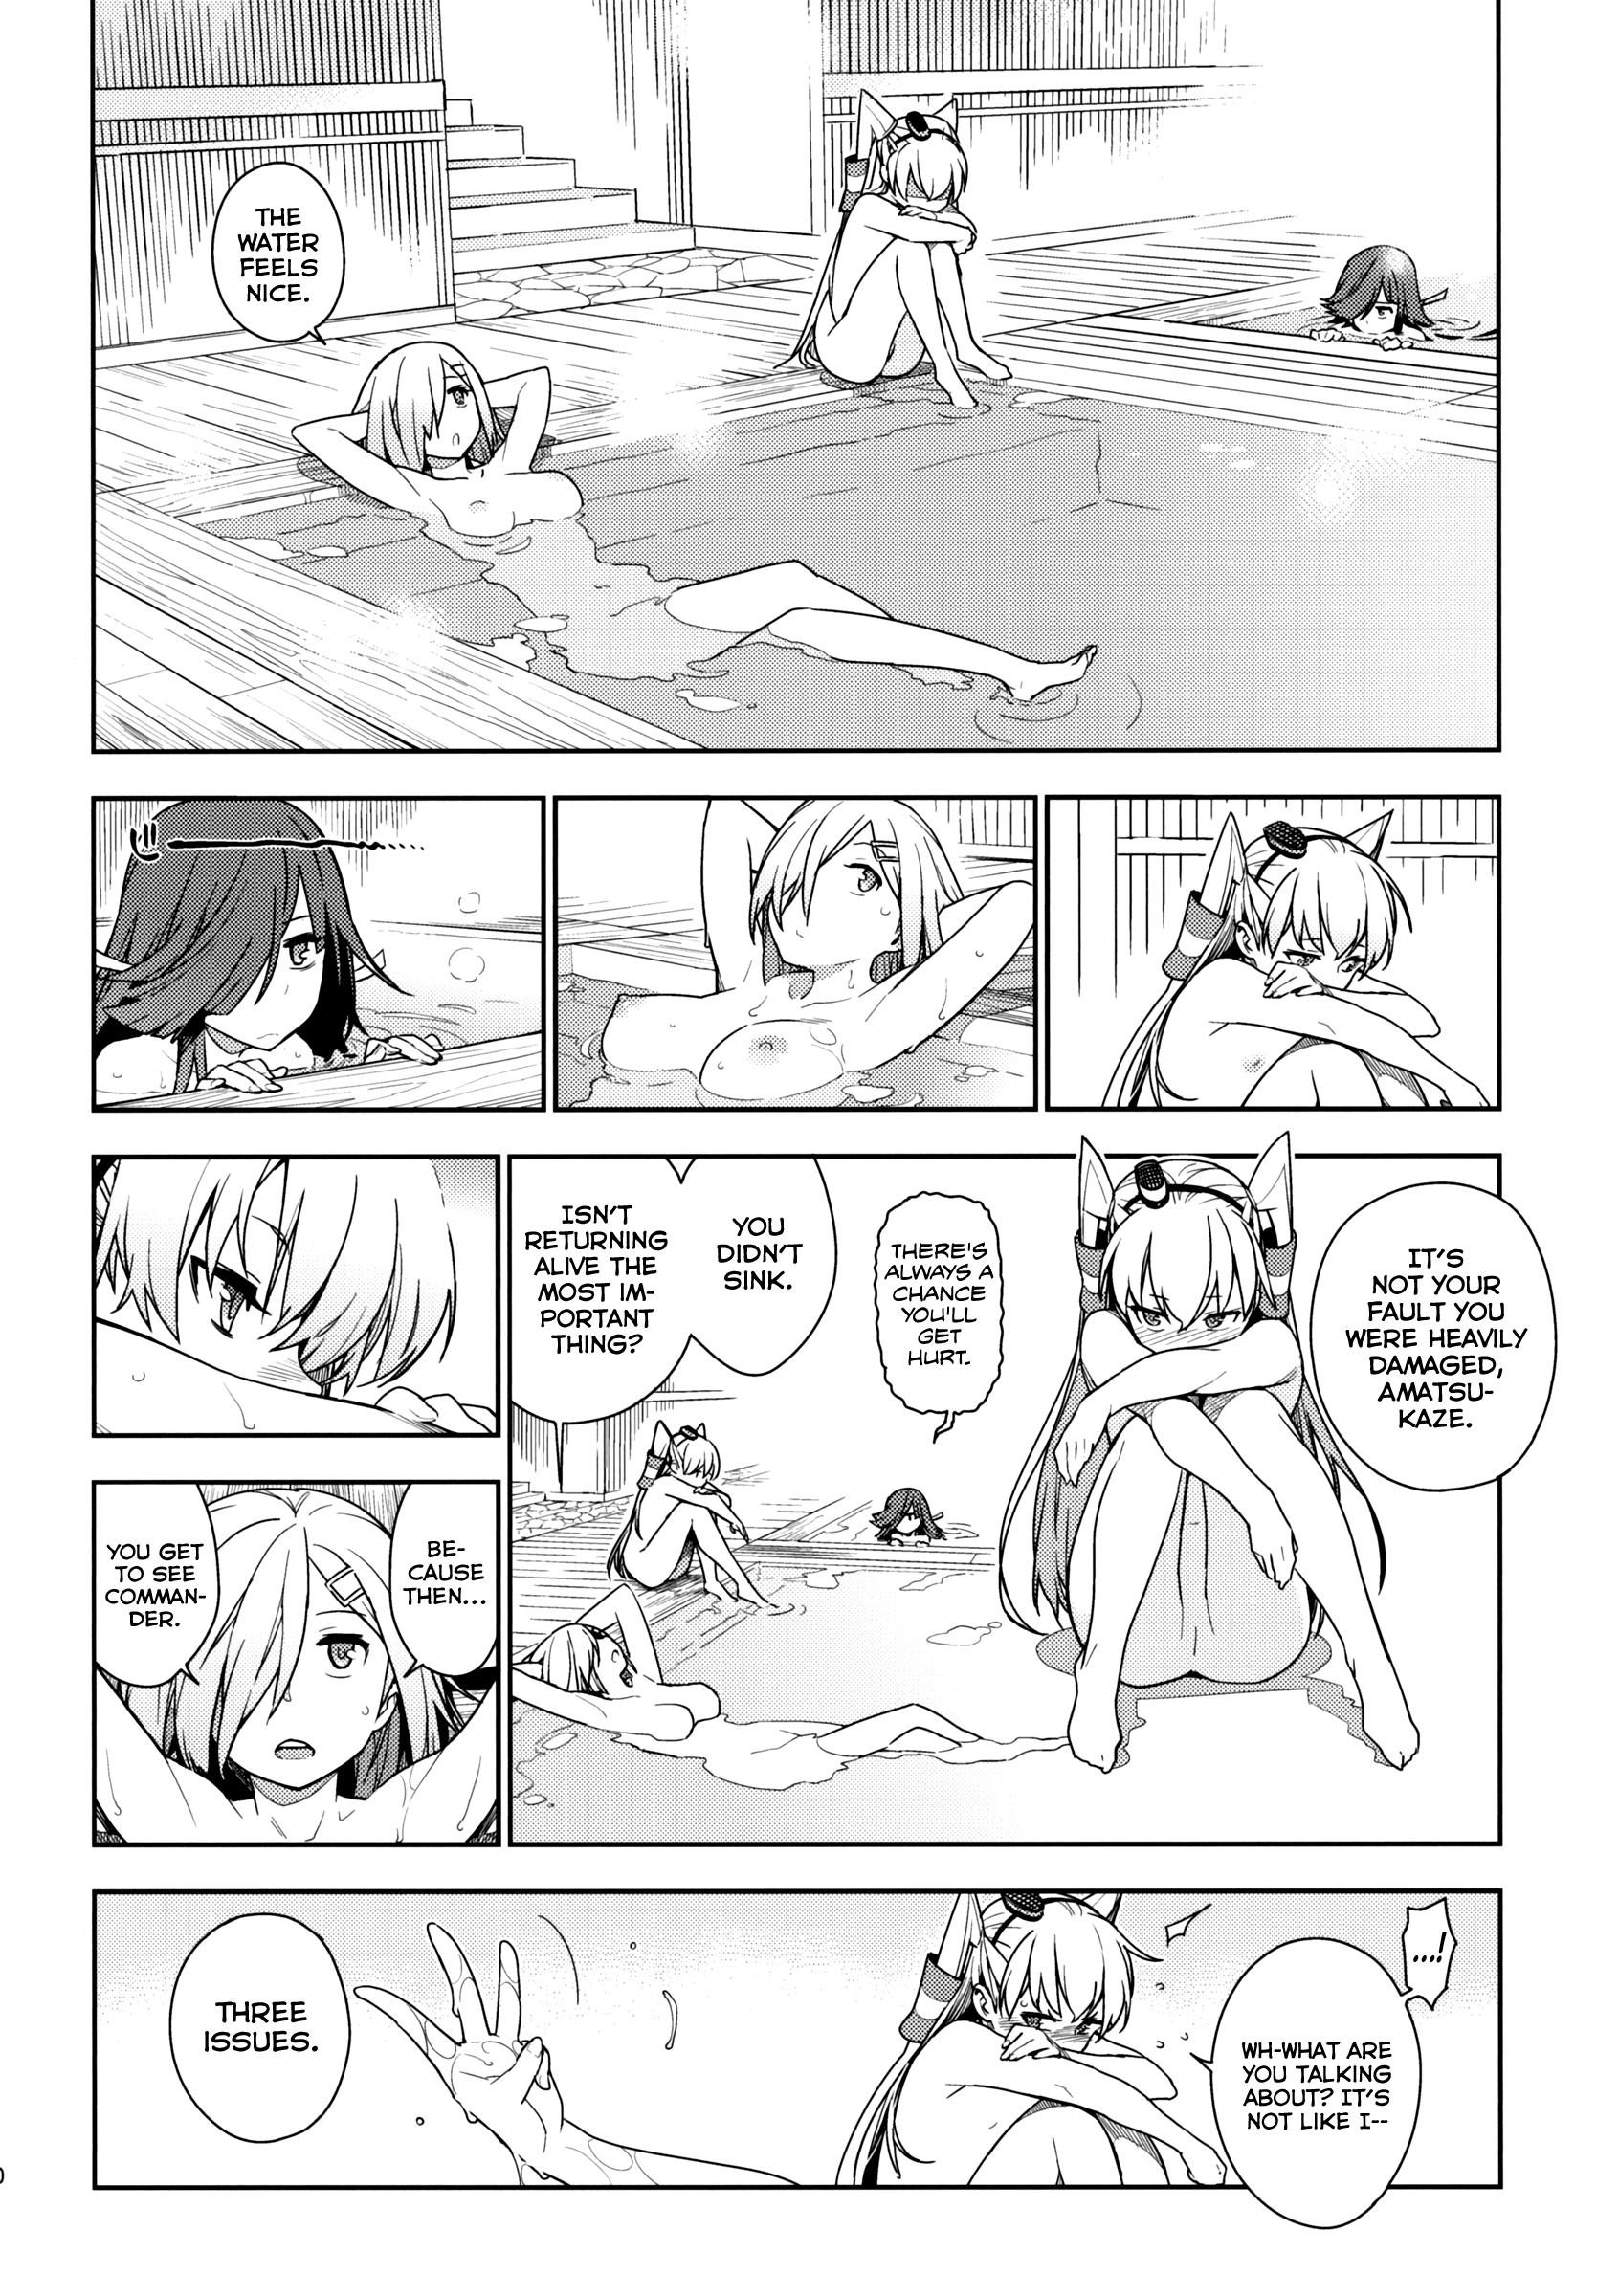 Dancing Little by little - Kantai collection Dicksucking - Page 9